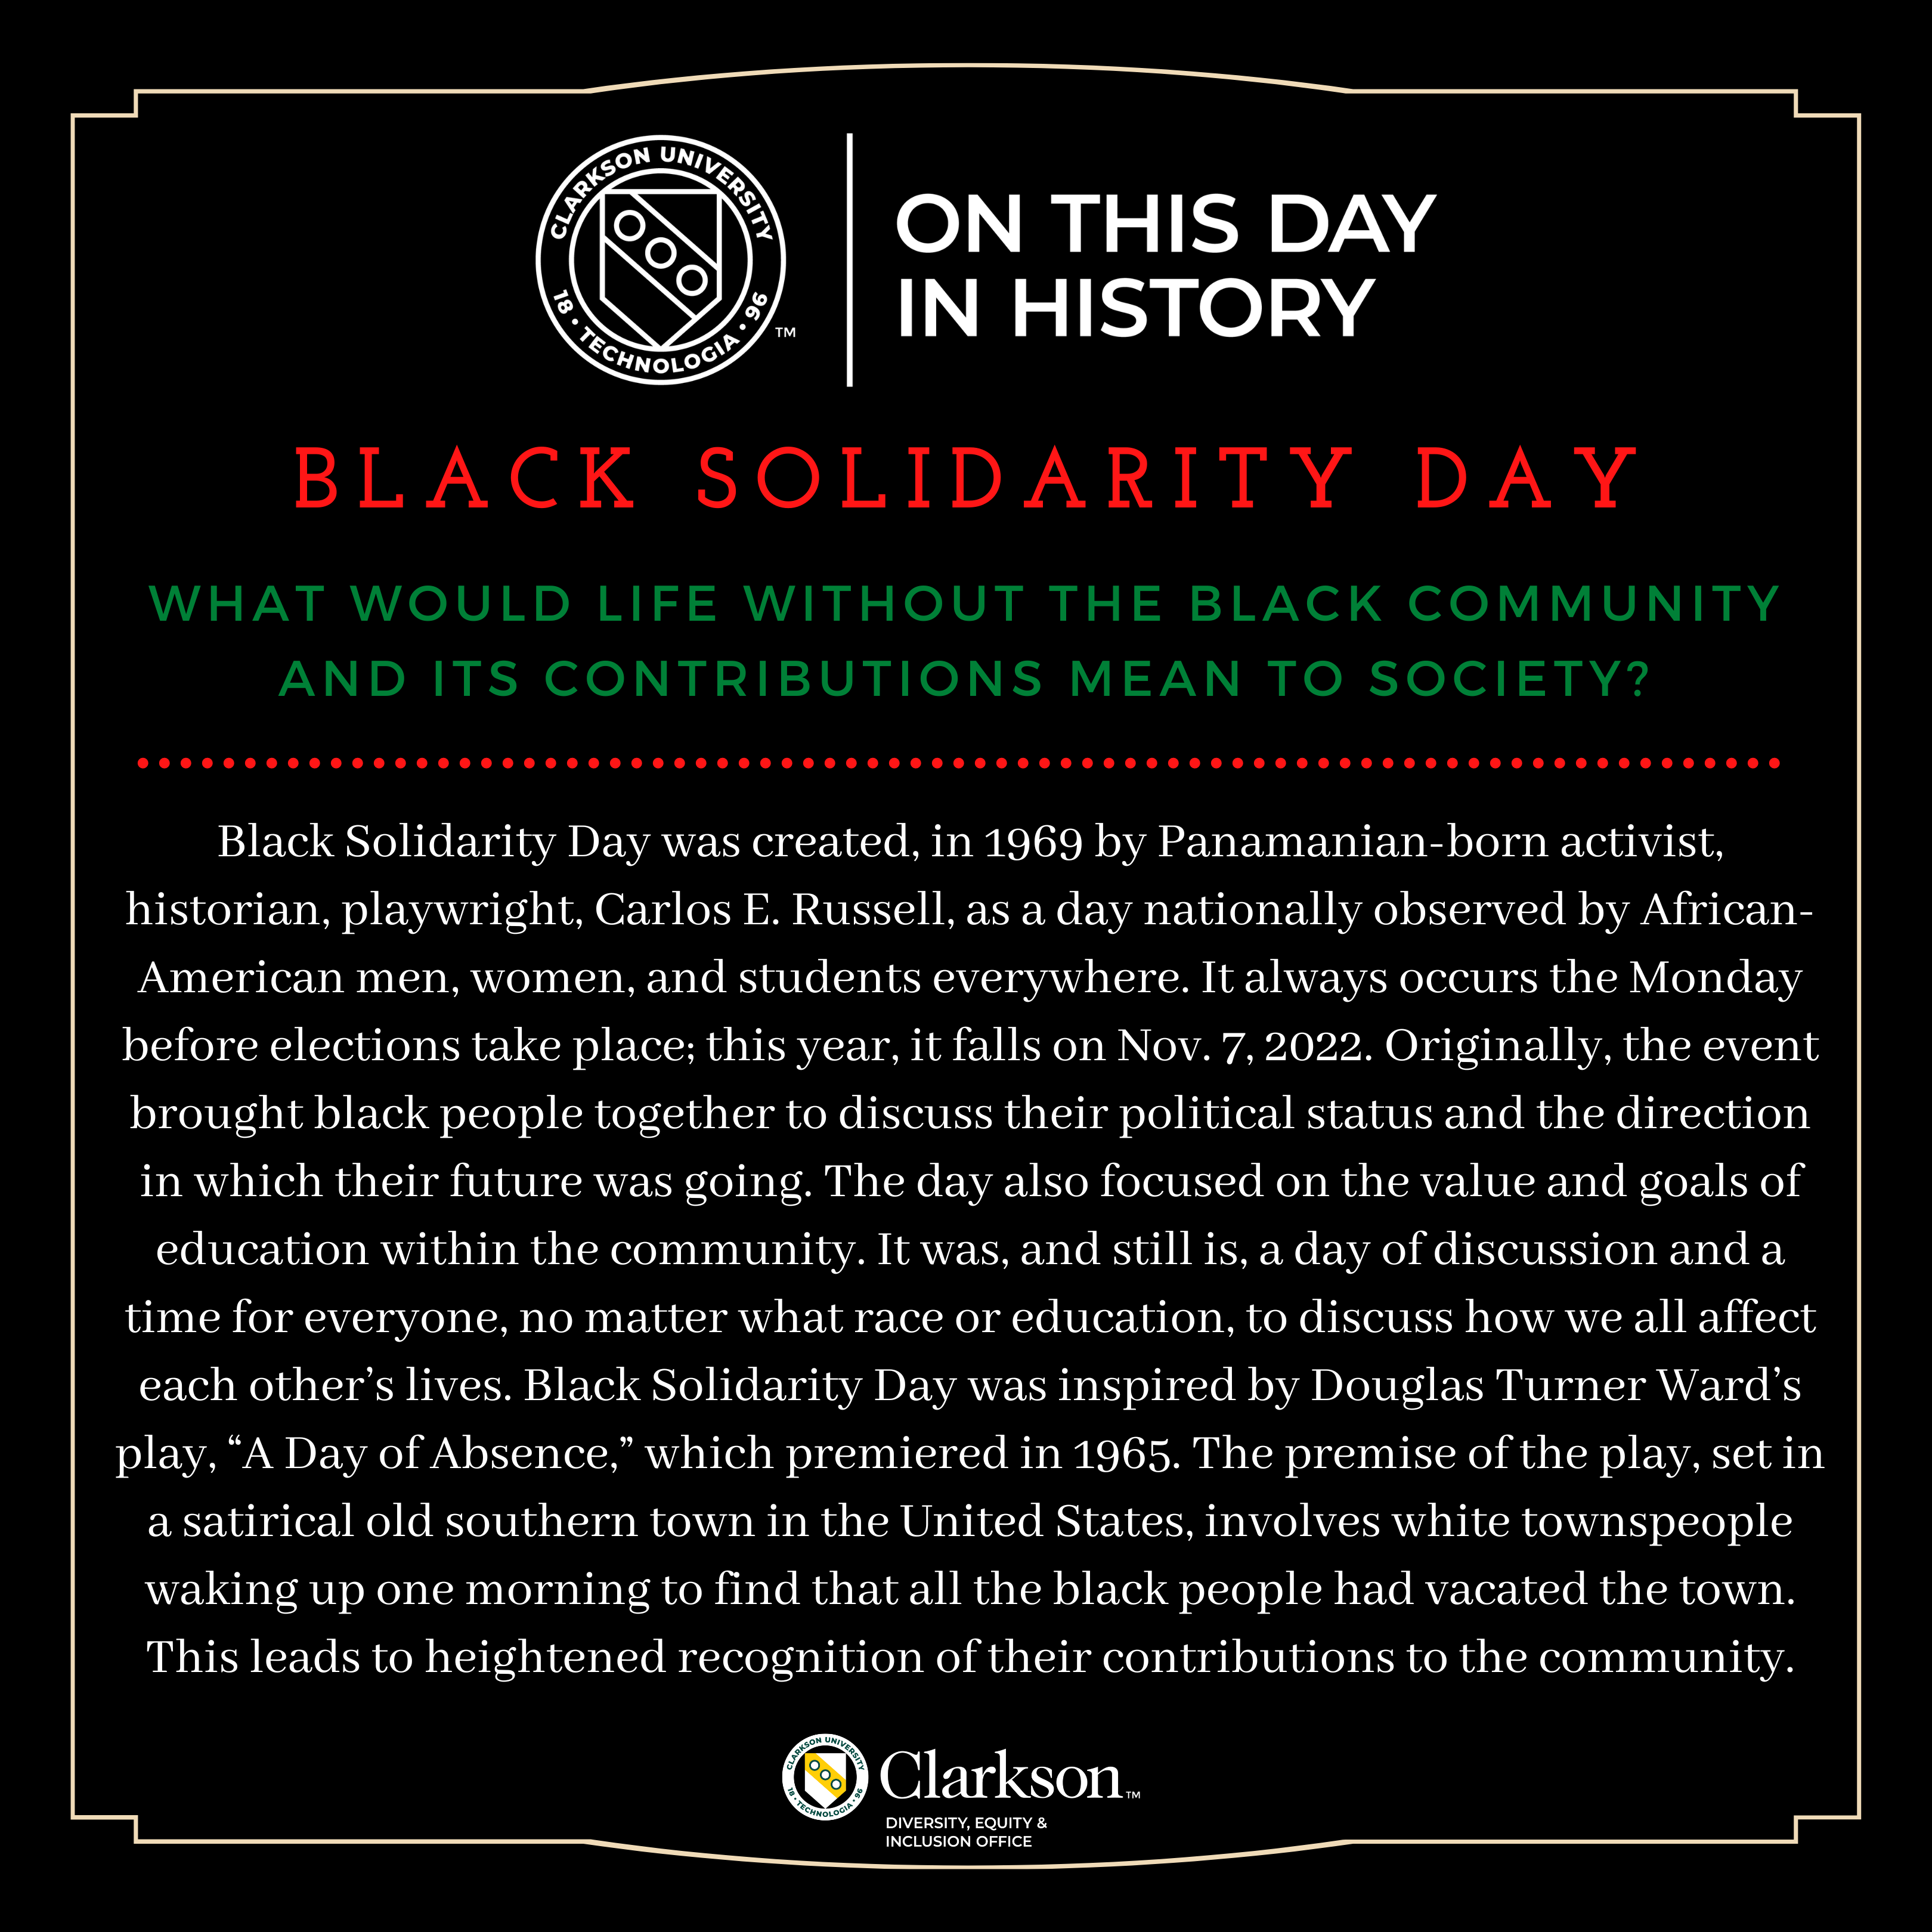 What is Black Solidarity Day?